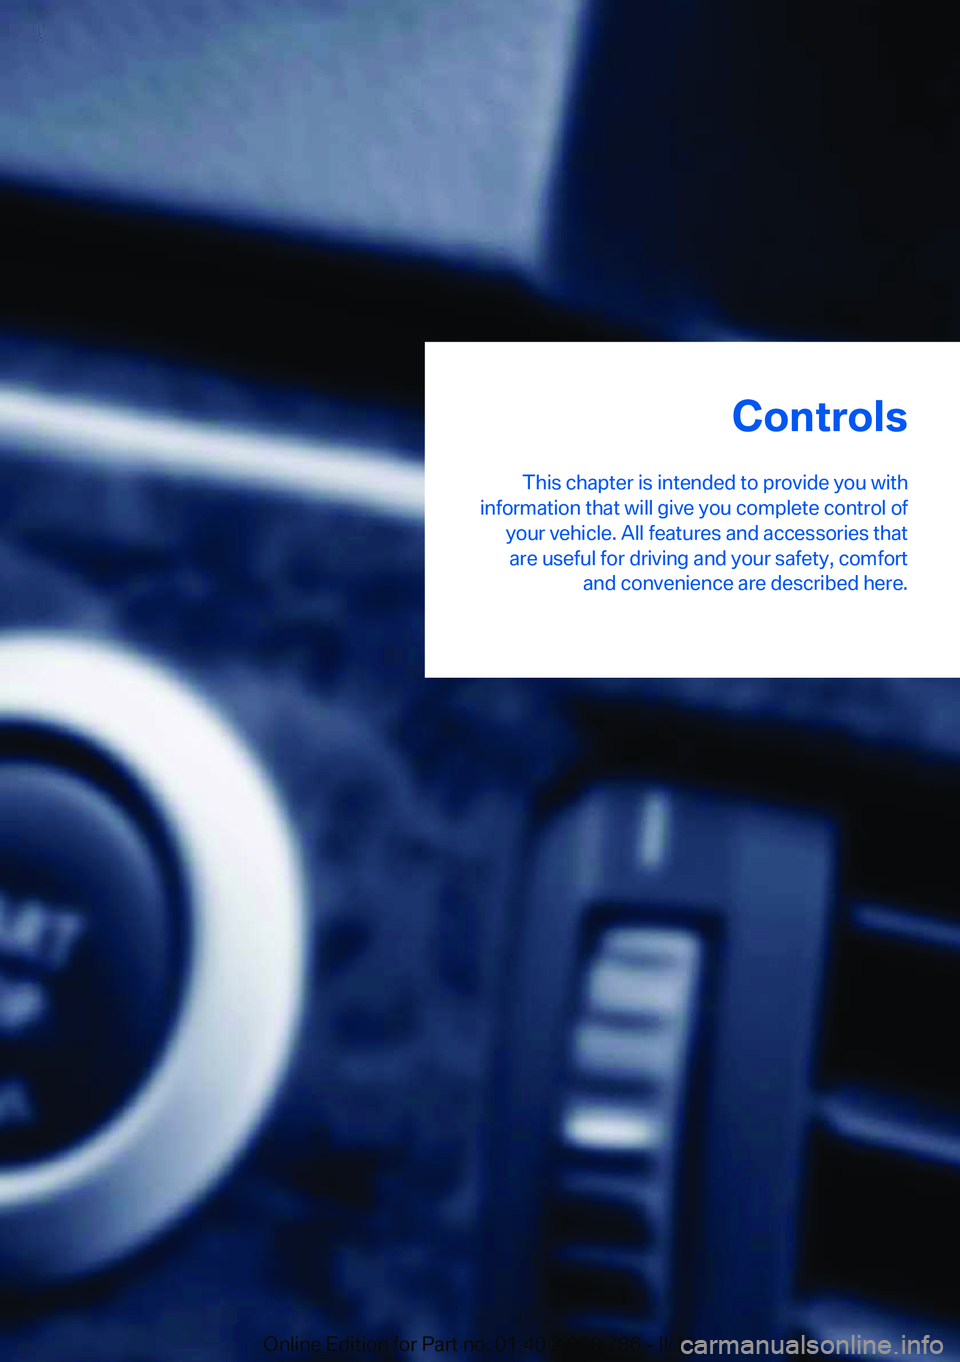 BMW M4 2015 Owners Guide Controls
This chapter is intended to provide you with
information that will give you complete control of your vehicle. All features and accessories thatare useful for driving and your safety, comfort 